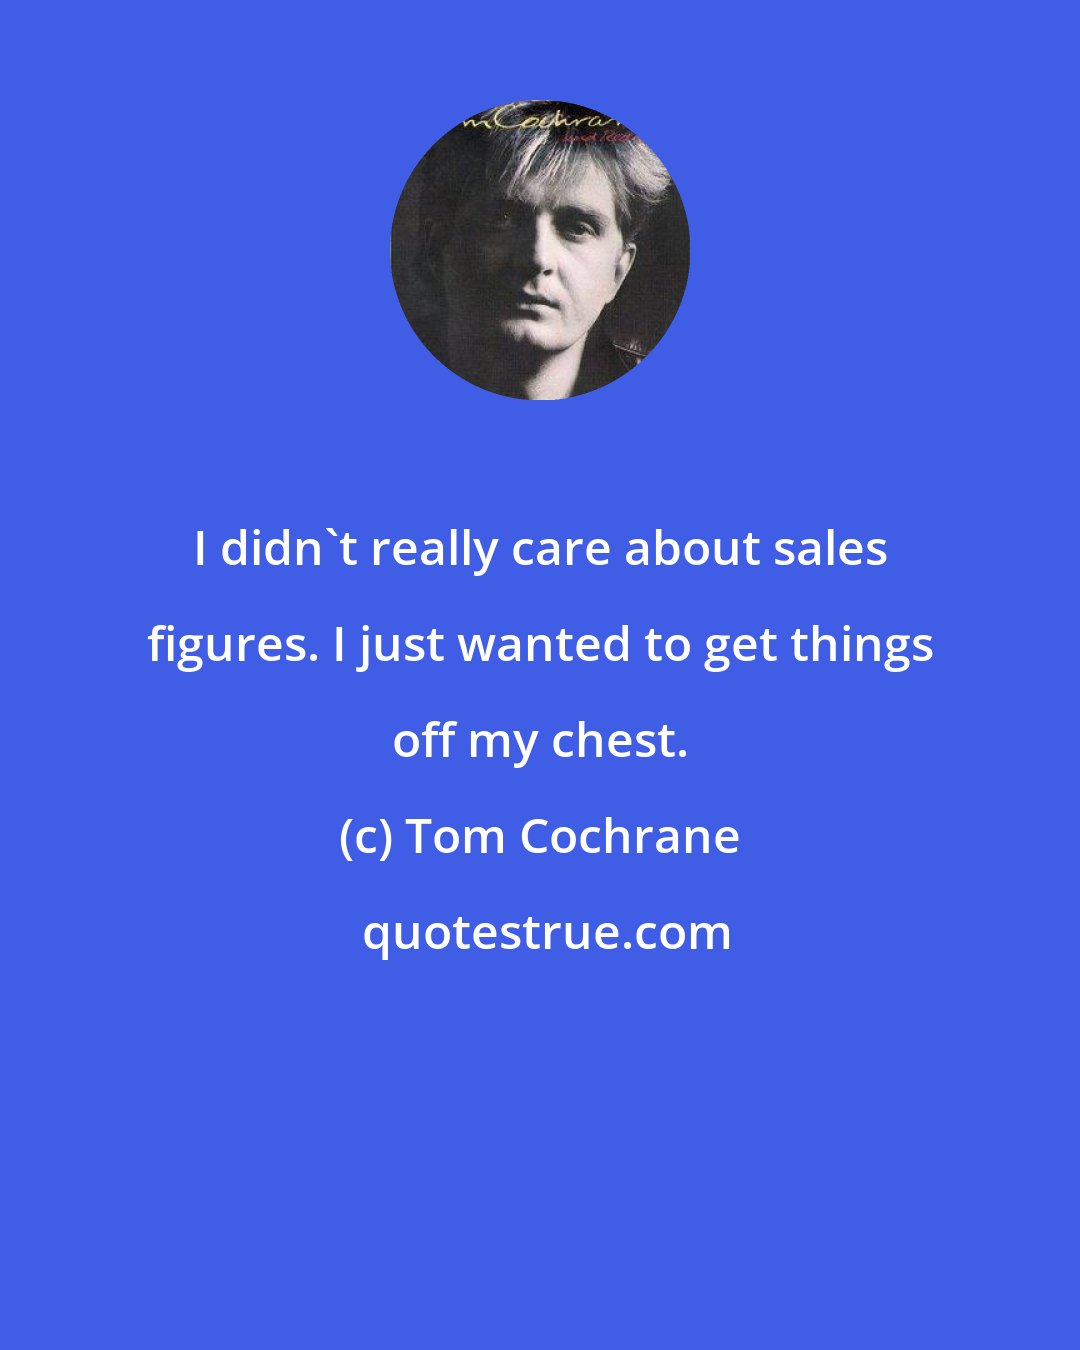 Tom Cochrane: I didn't really care about sales figures. I just wanted to get things off my chest.